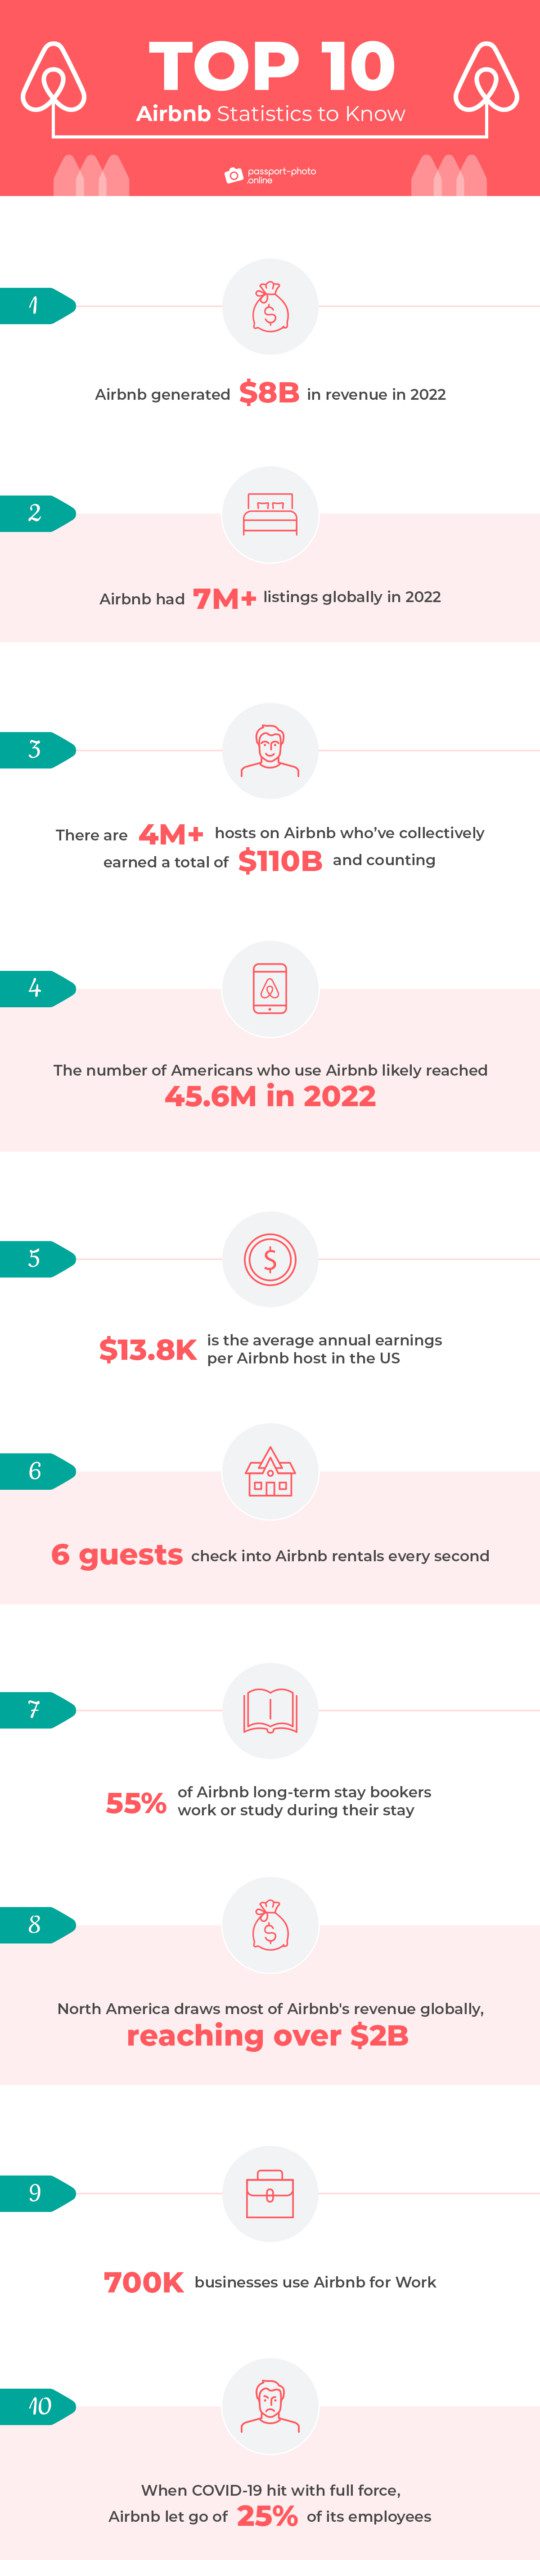 Top 10 Airbnb statistics to know in 2023